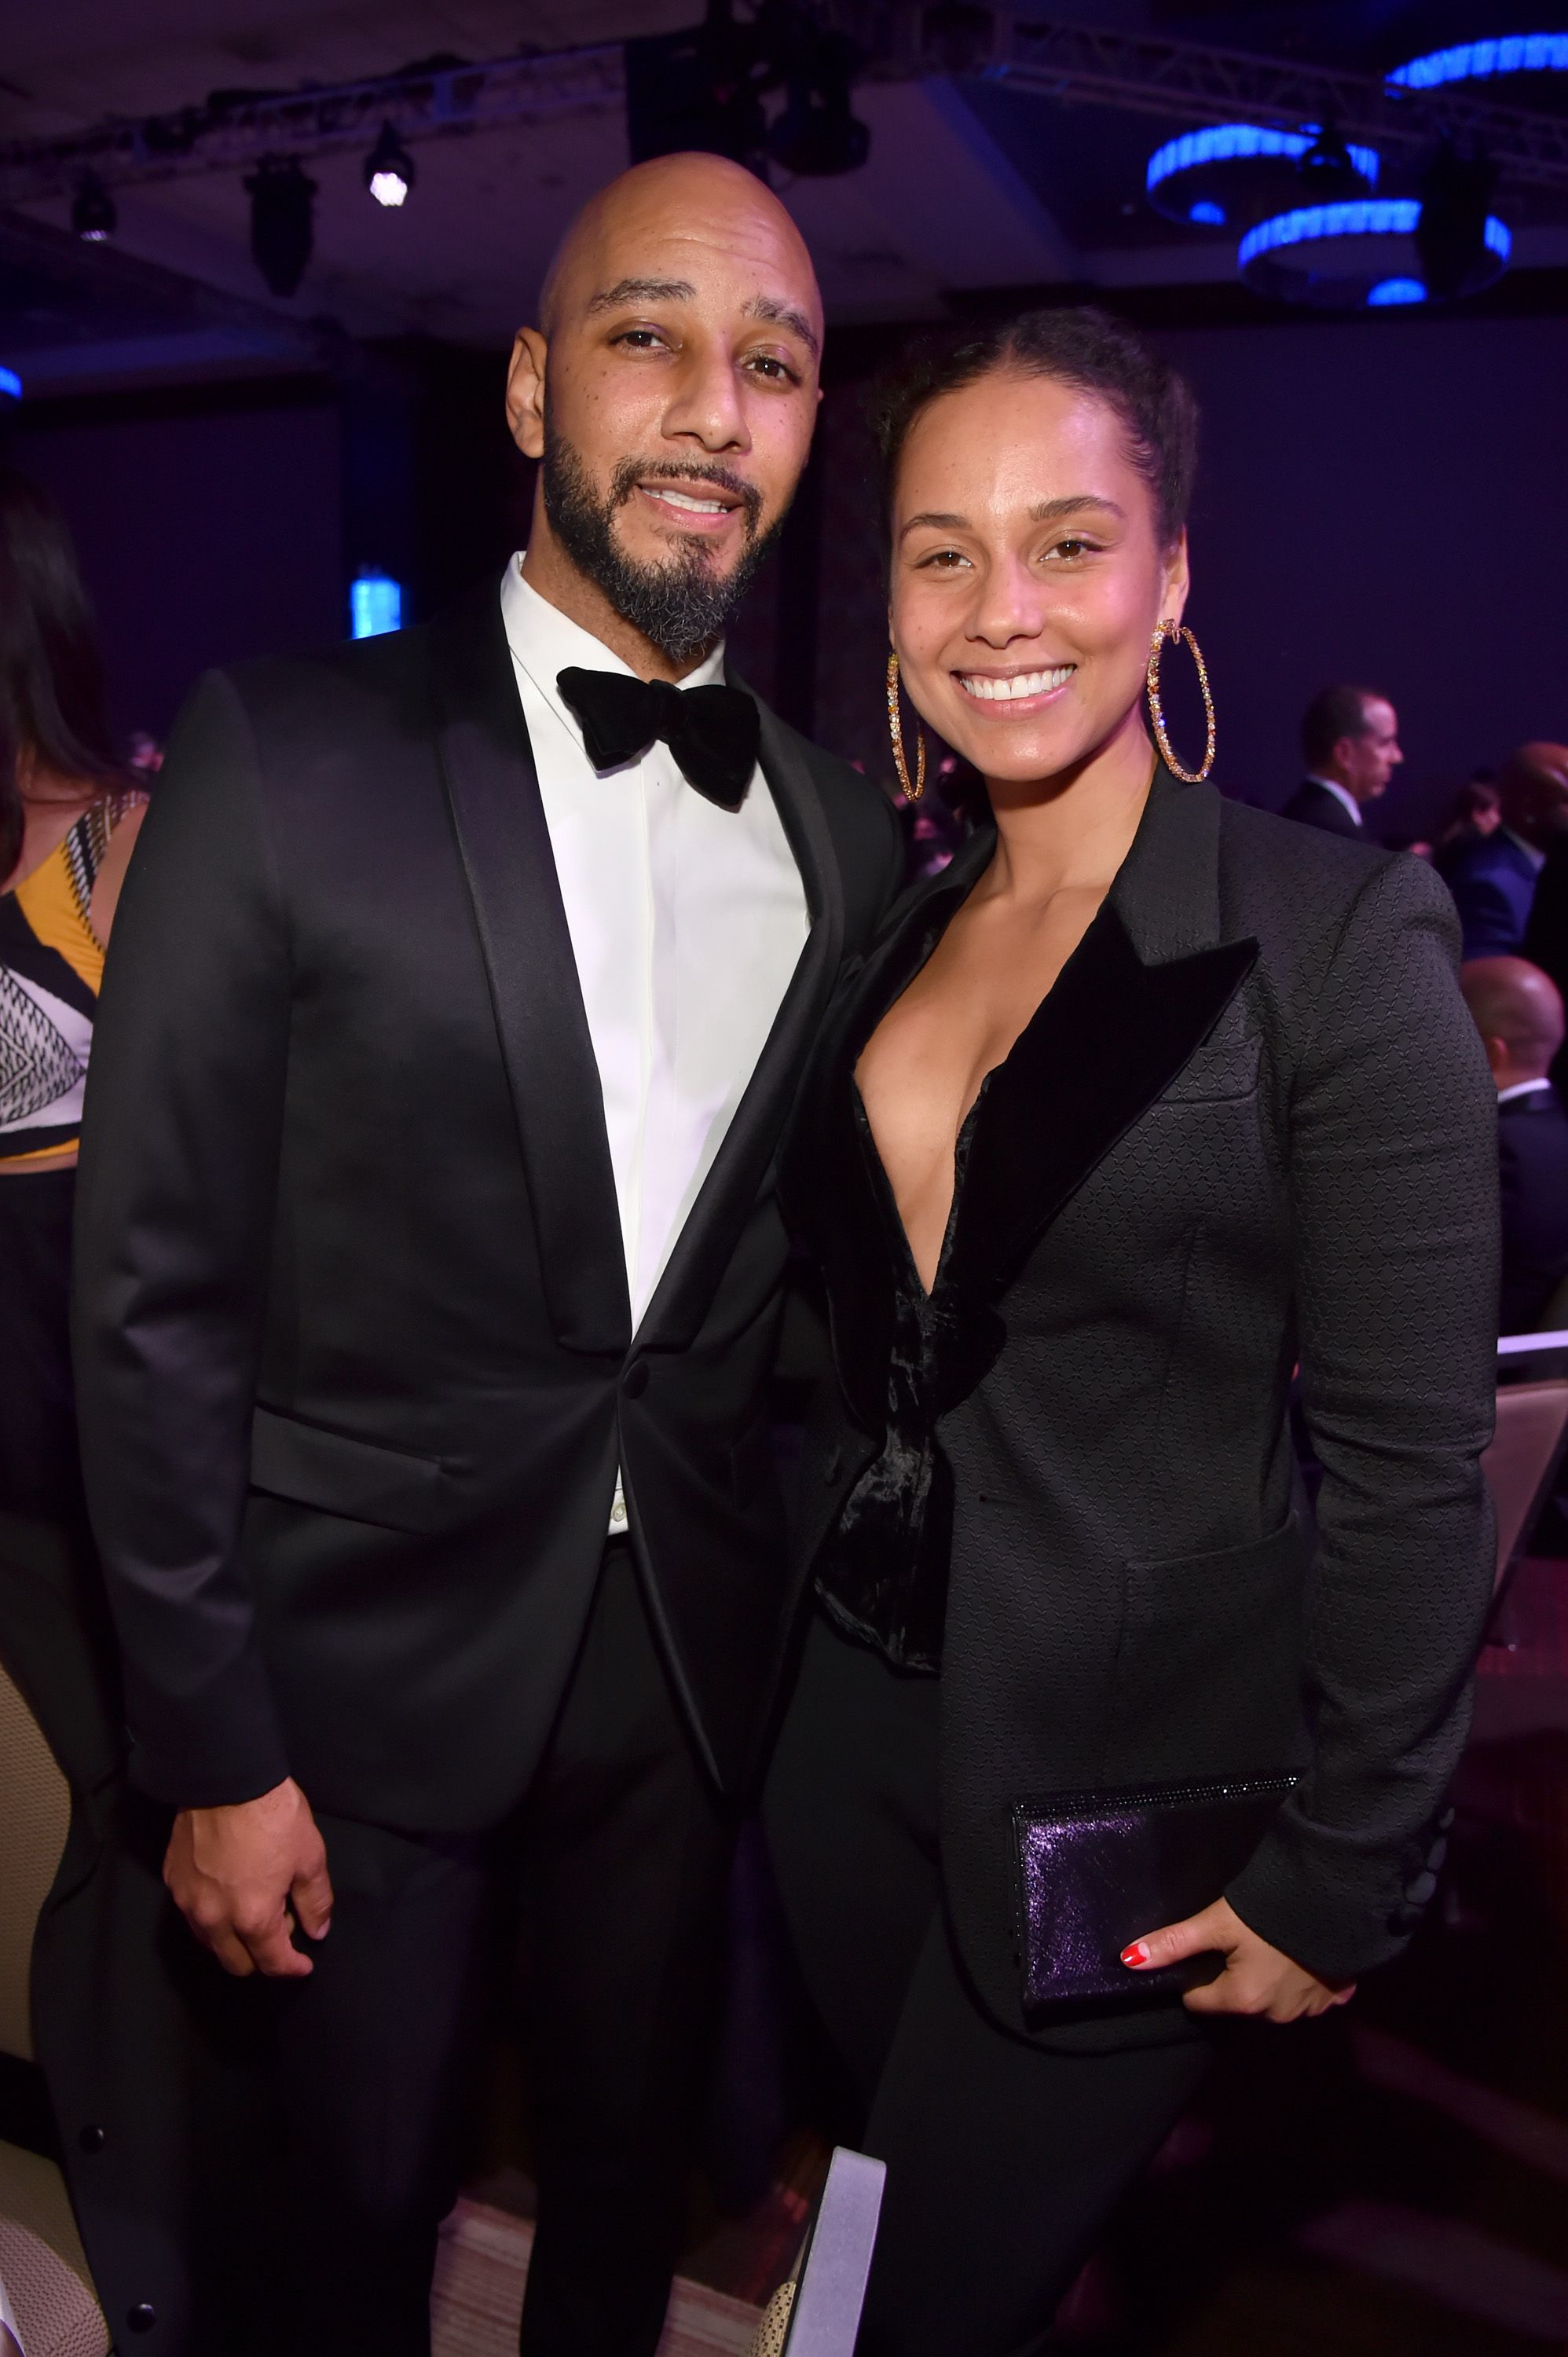 Married couple Alicia Keys and Swizz Beatz at the Pre-Grammy Gala on January 27, 2018 in New York. | Photo: Getty Images